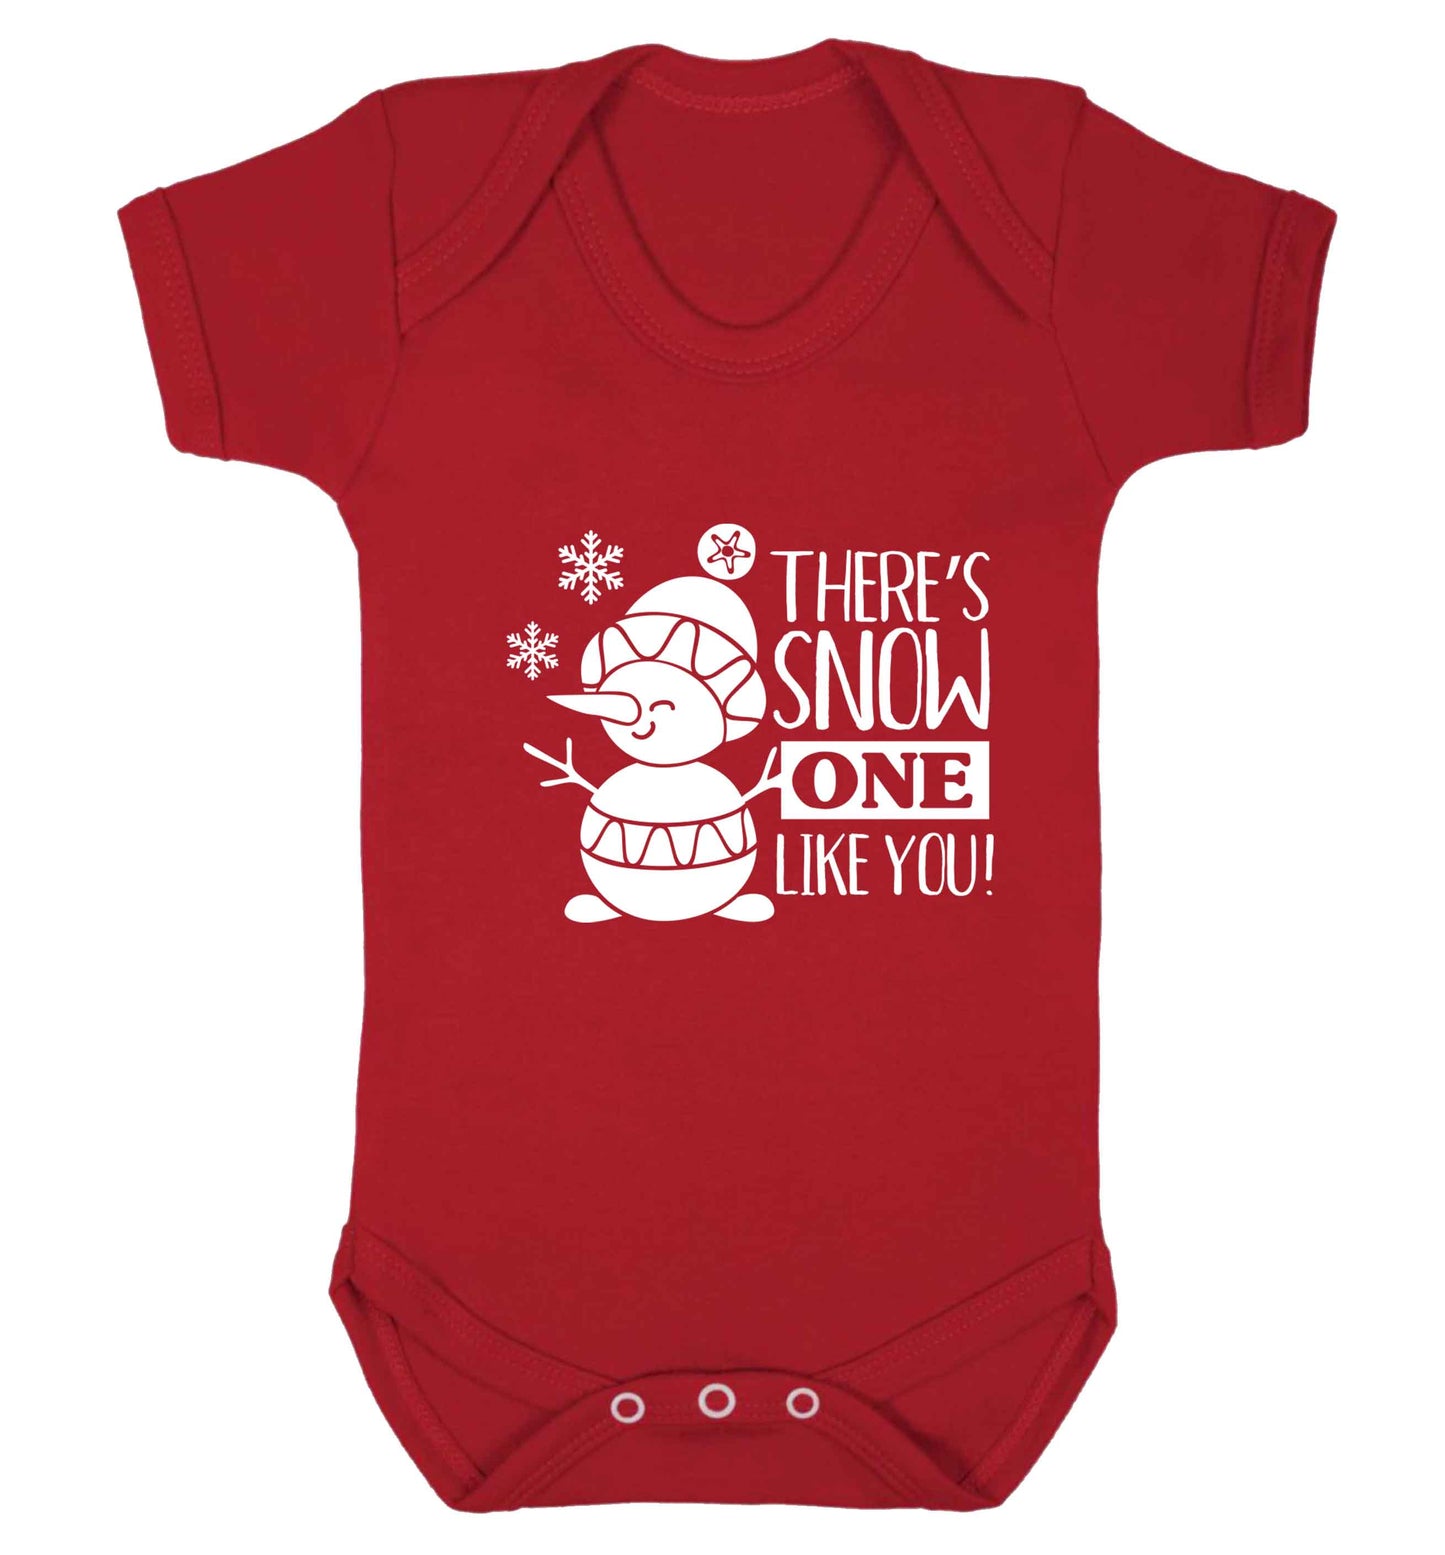 There's snow one like you baby vest red 18-24 months